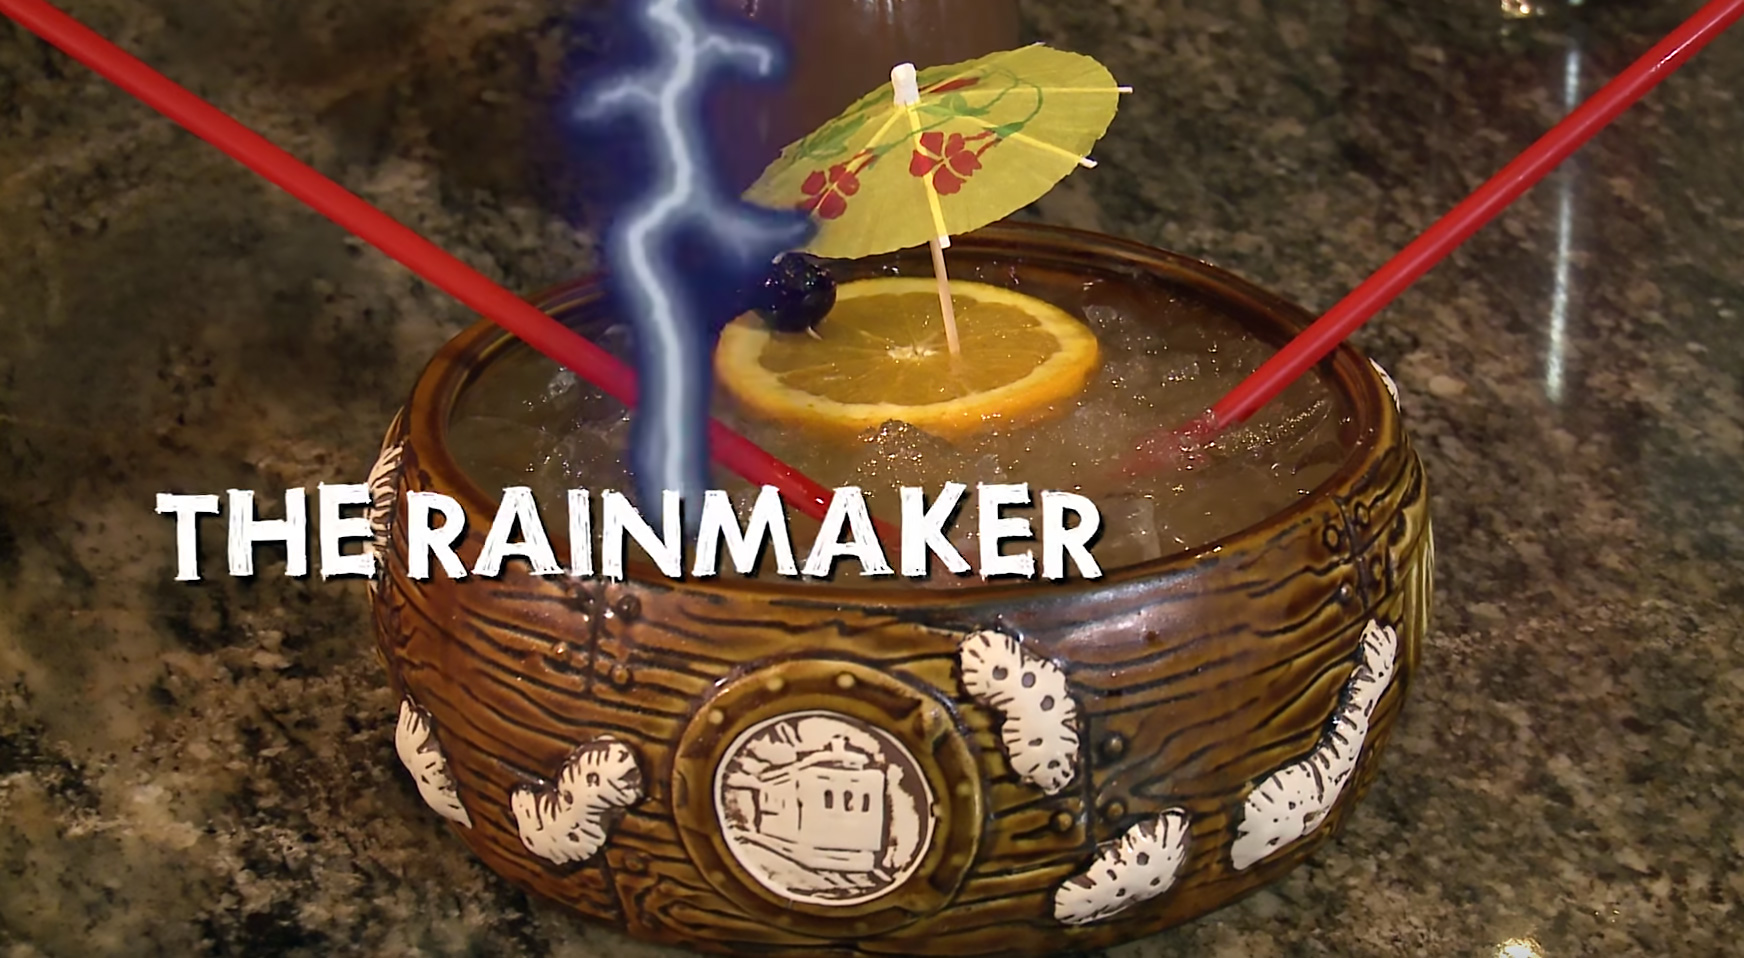 The Rainmaker cocktail at the Tonga Room